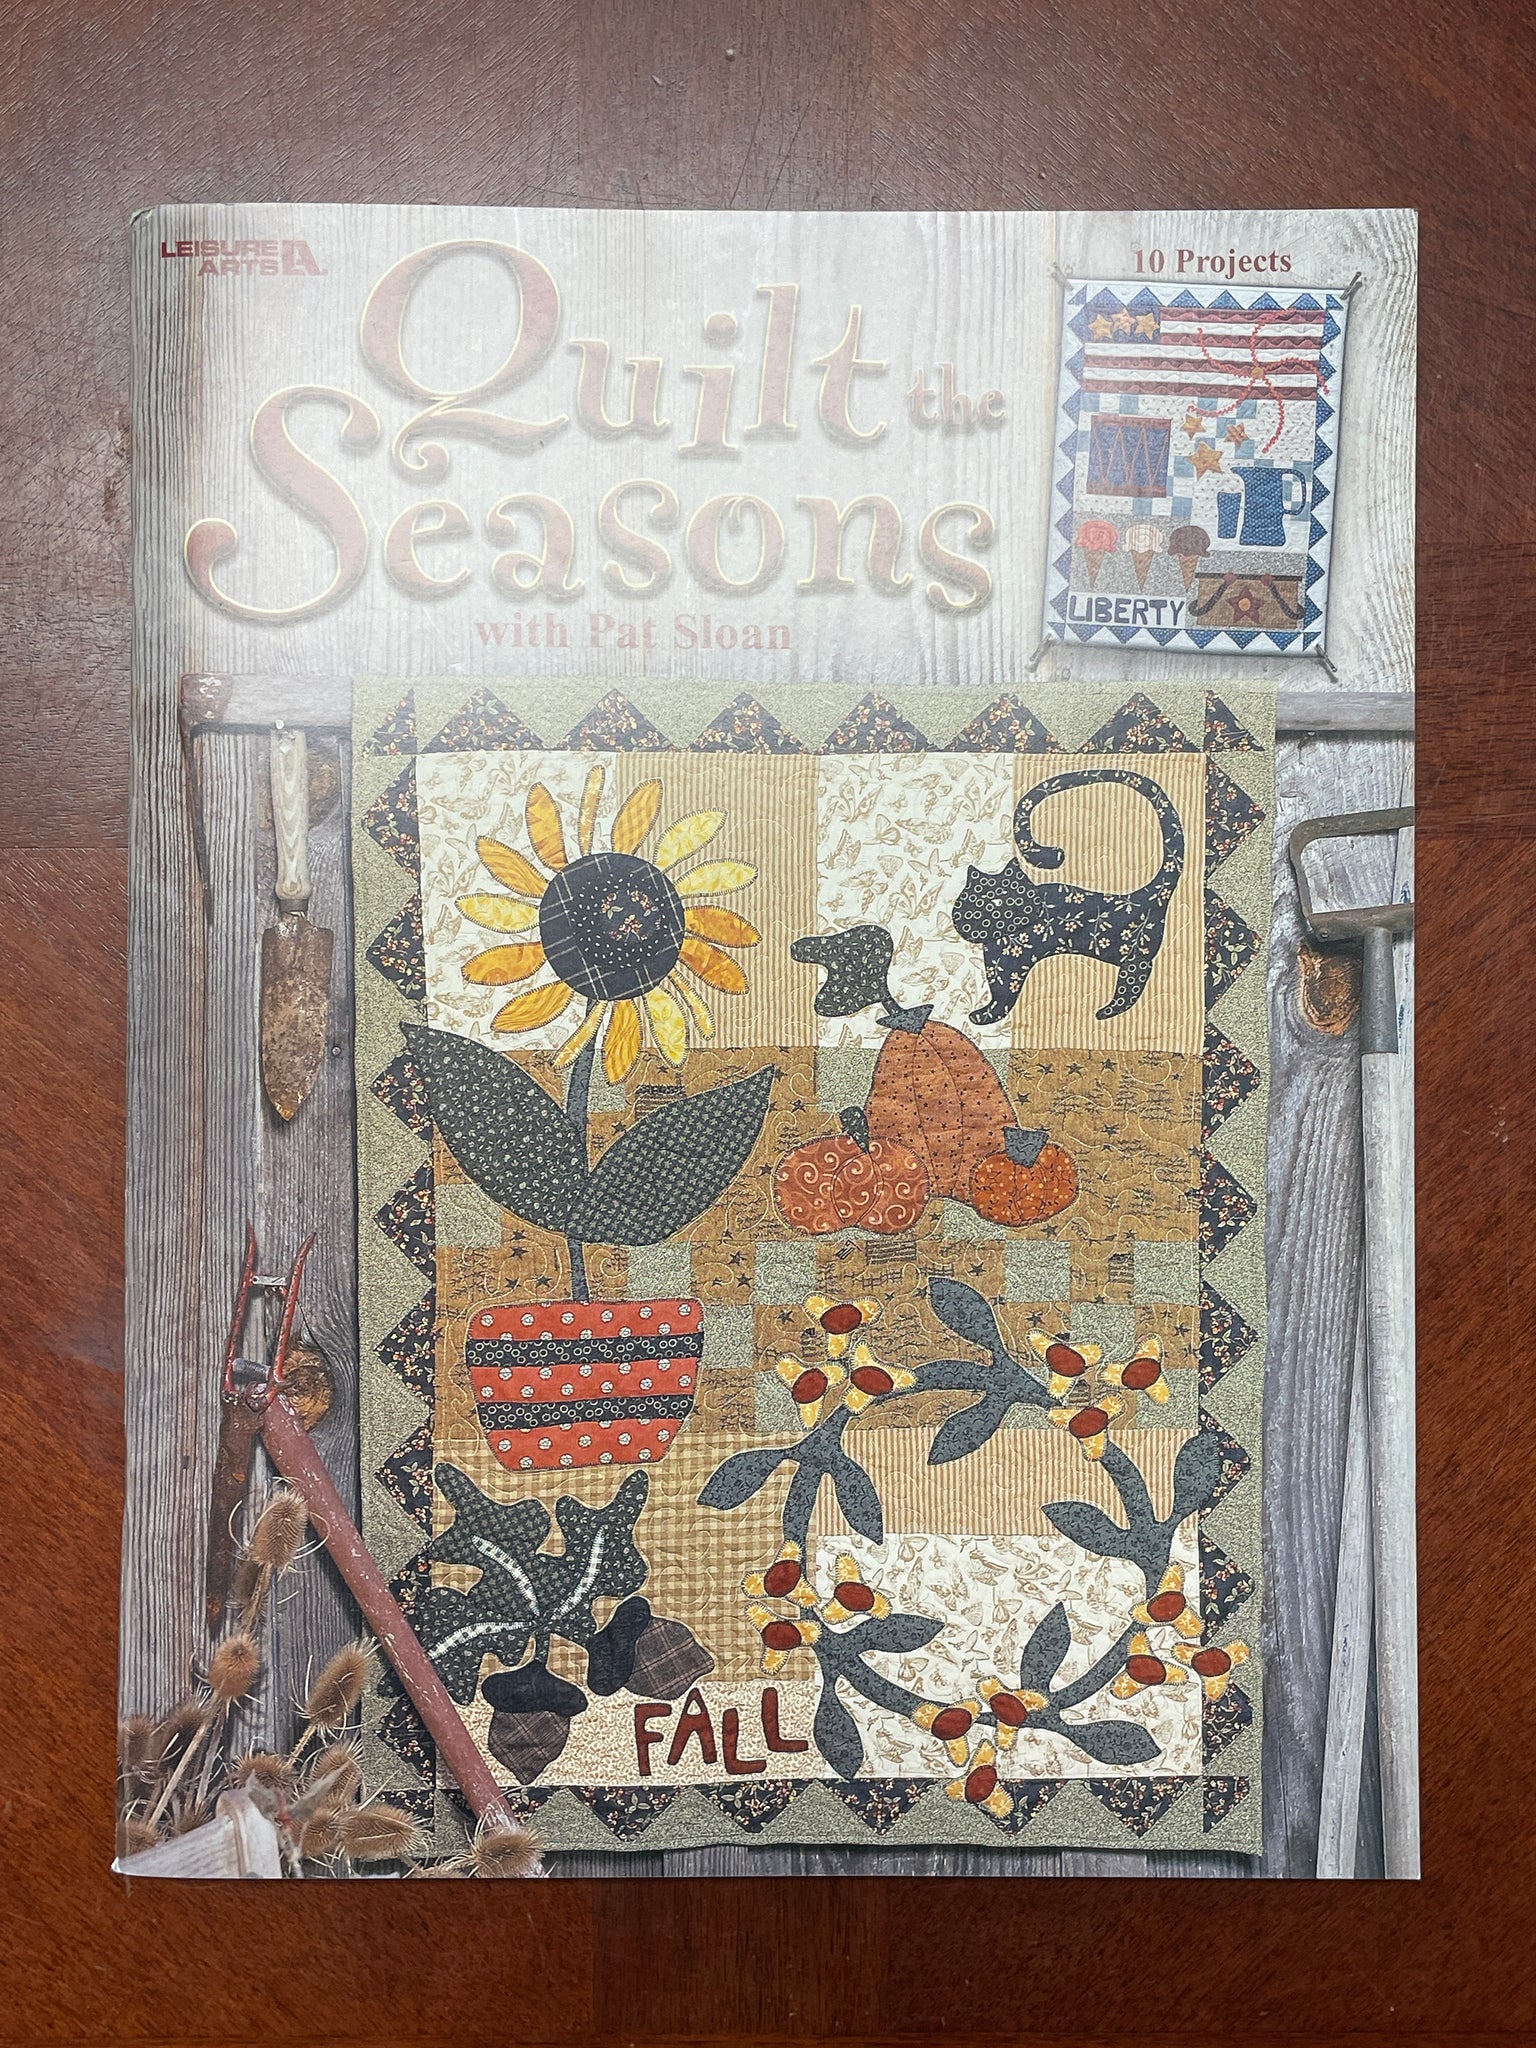 2003 Quilting Book - "Quilt the Seasons"